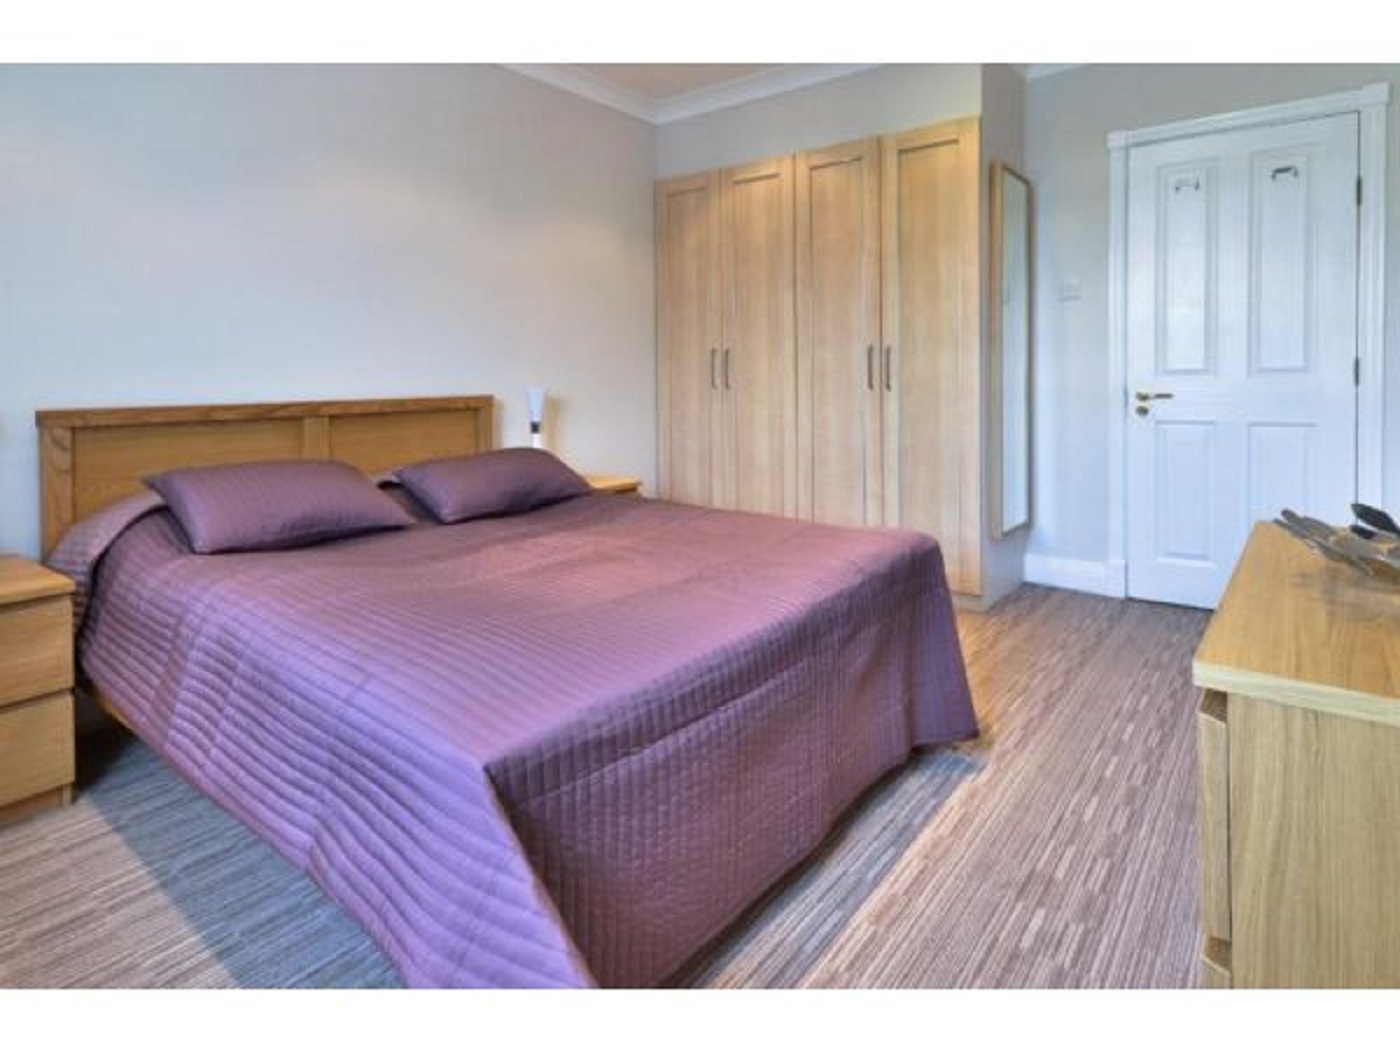 Fantastic Two Double Bedroom Apartment in the Heart of the City. RoomsLocal image